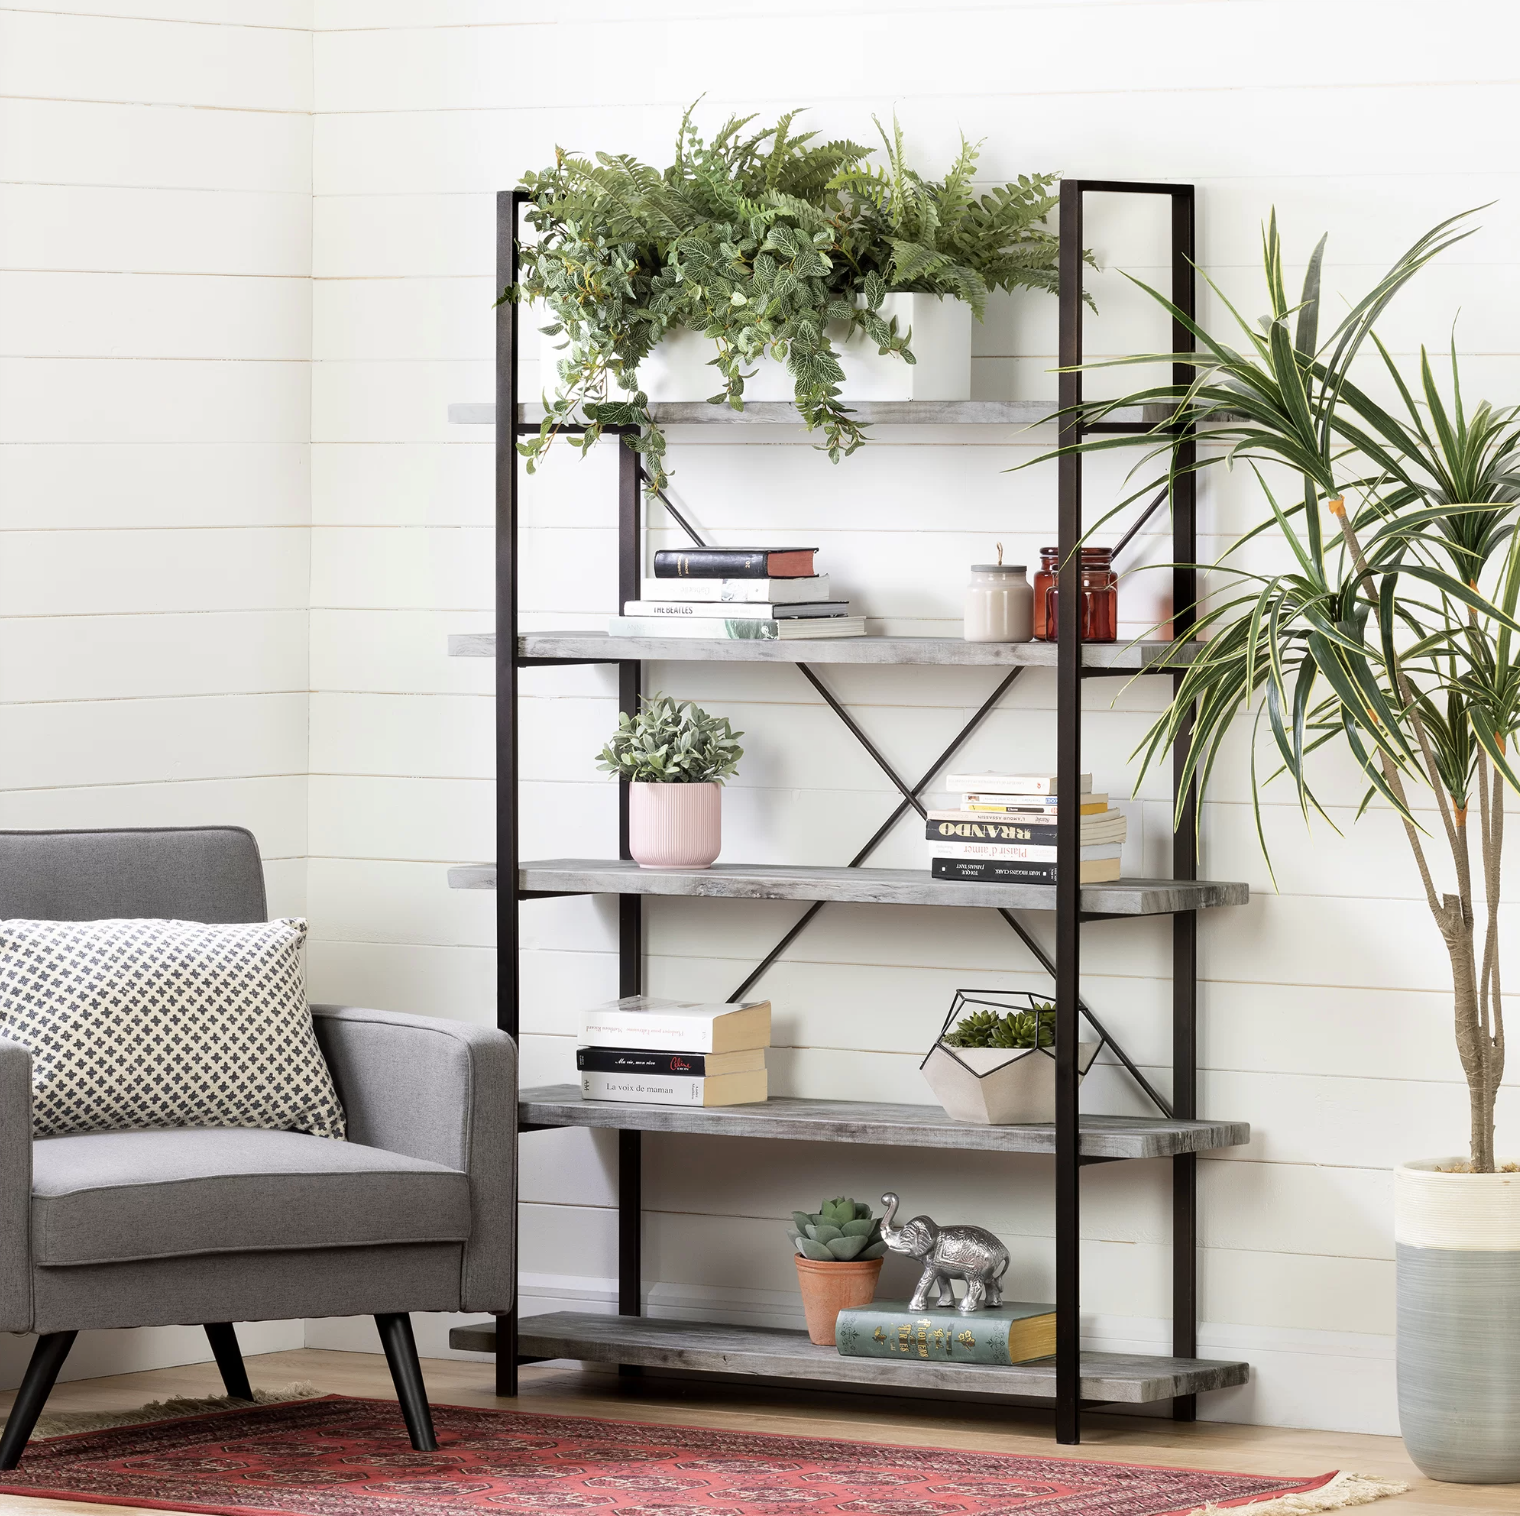 The bookshelf in a living room with books and plants on it